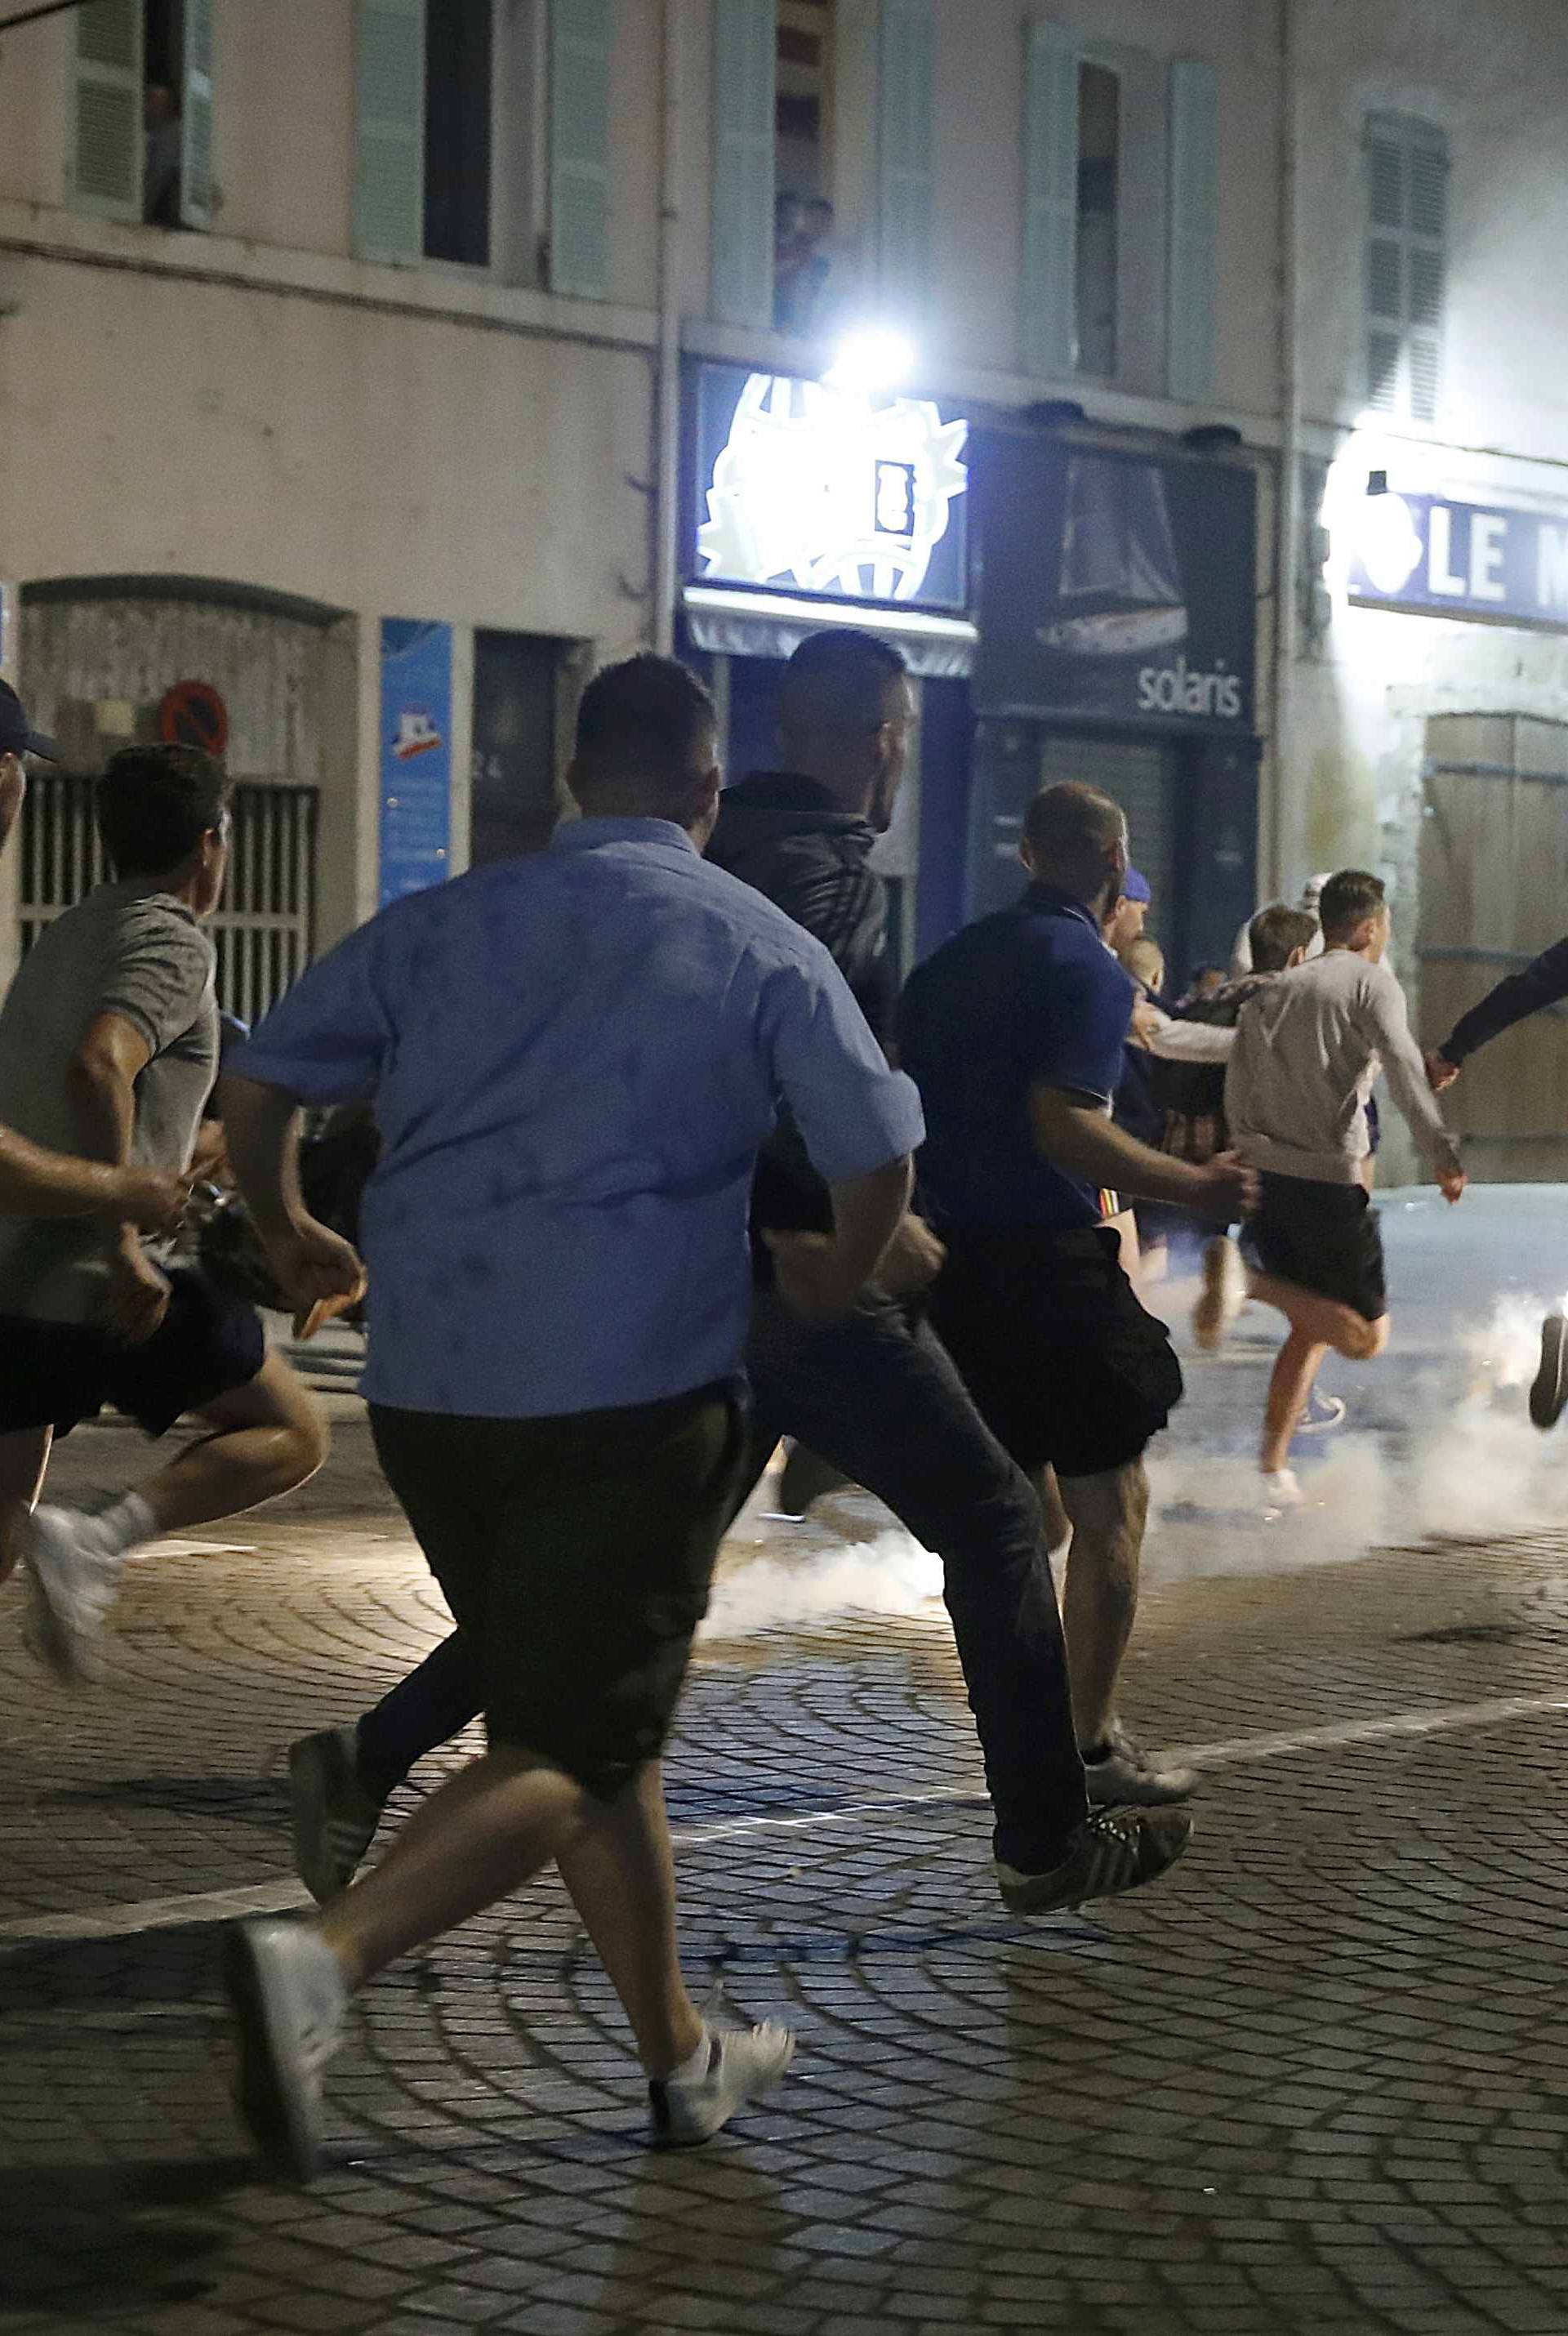 Local youths and supporters clash ahead of England's EURO 2016 match against Russia in Marseille